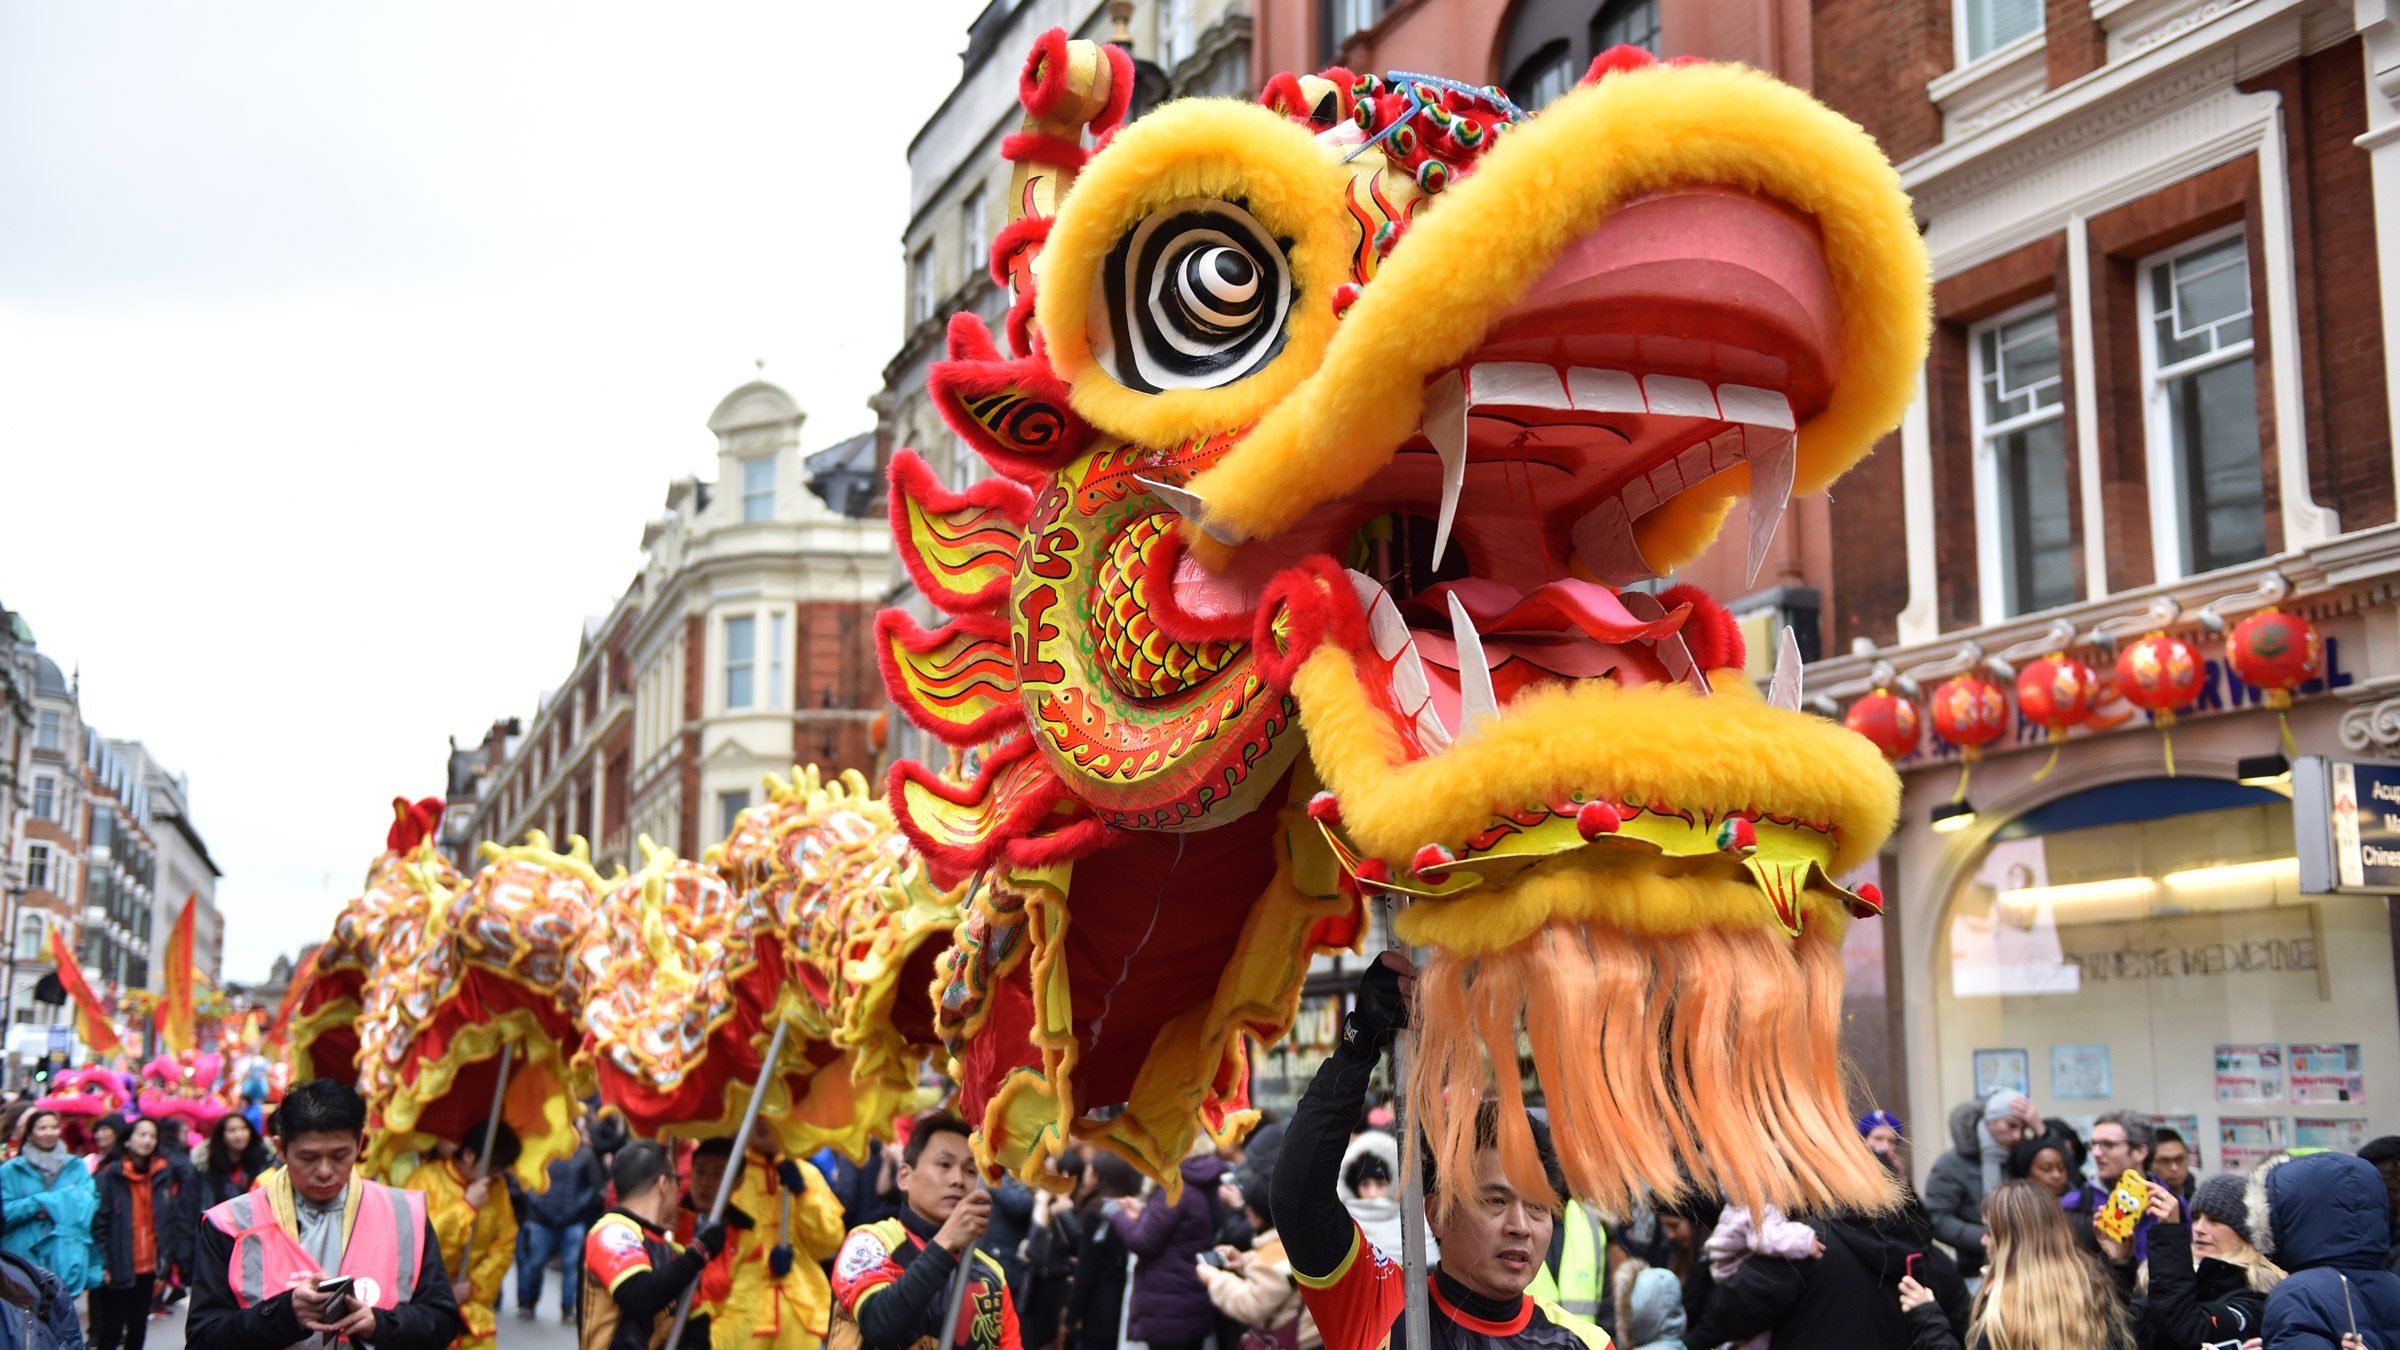 Chinese New Year, Summary, History, Traditions, & Facts